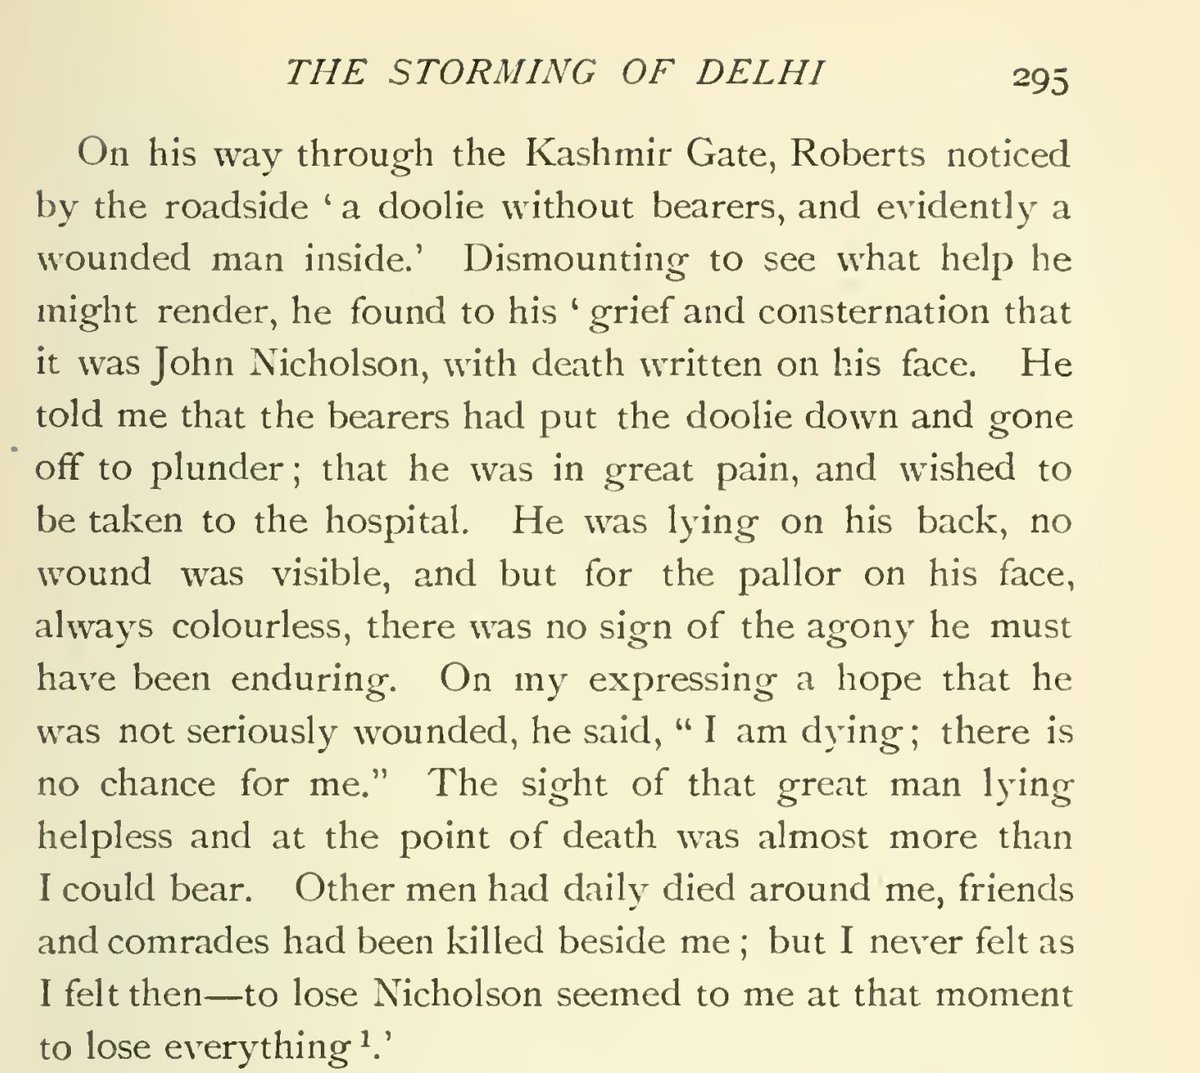 His Hero mortally wounded left him distraught. Nicholson had survived so many brushes with death that nobody thought he would die on the streets of Delhi but many great men had their lives ended by this savage conflict